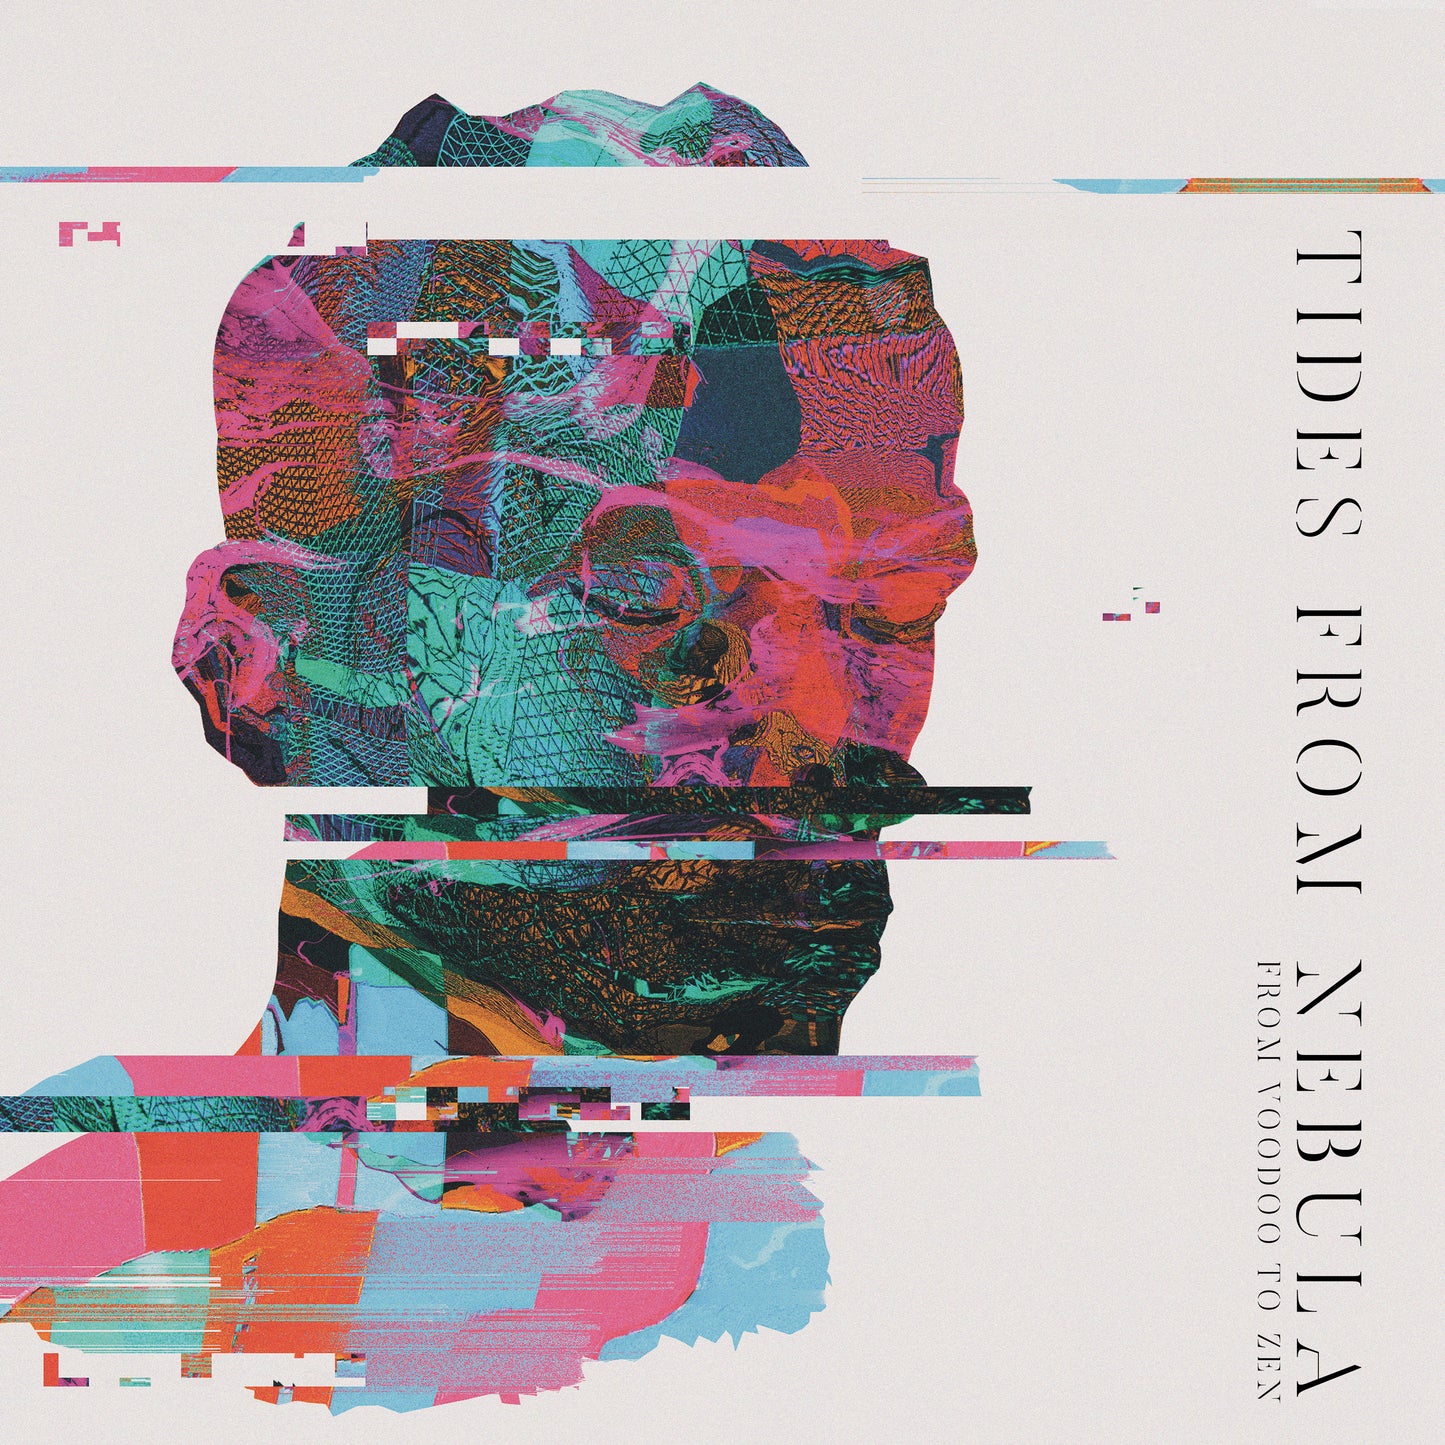 Tides From Nebula "From Voodoo To Zen" LP (different vinyl colors)